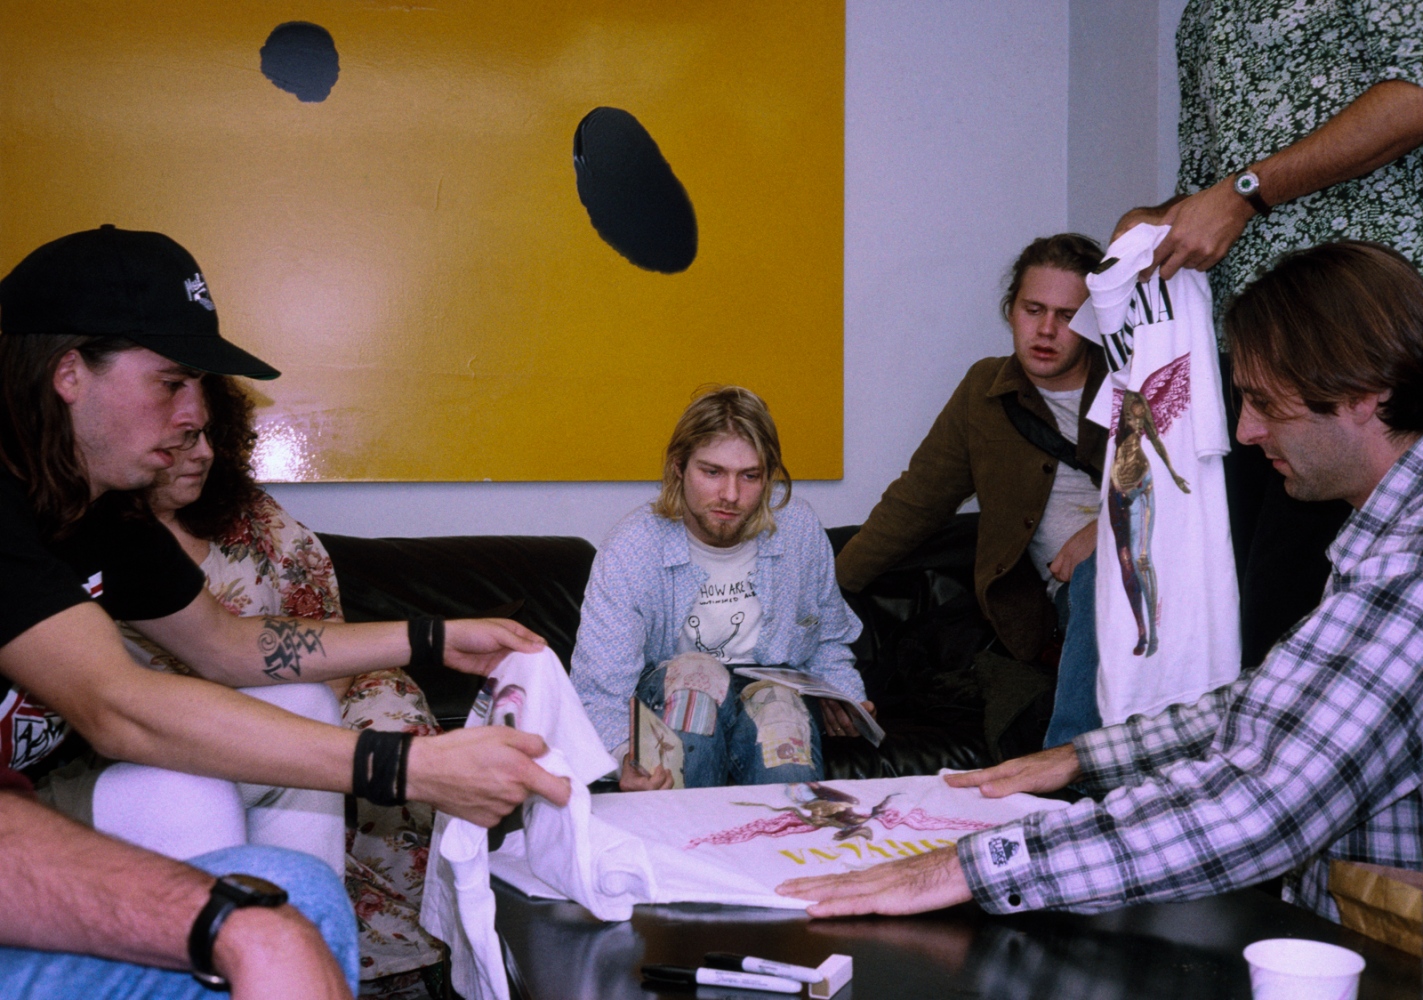 ROCK N ROLL FOR LIFE, NY TIMES MAGAZINE - Nirvana approving merchandise for In Utero Tour, New York...